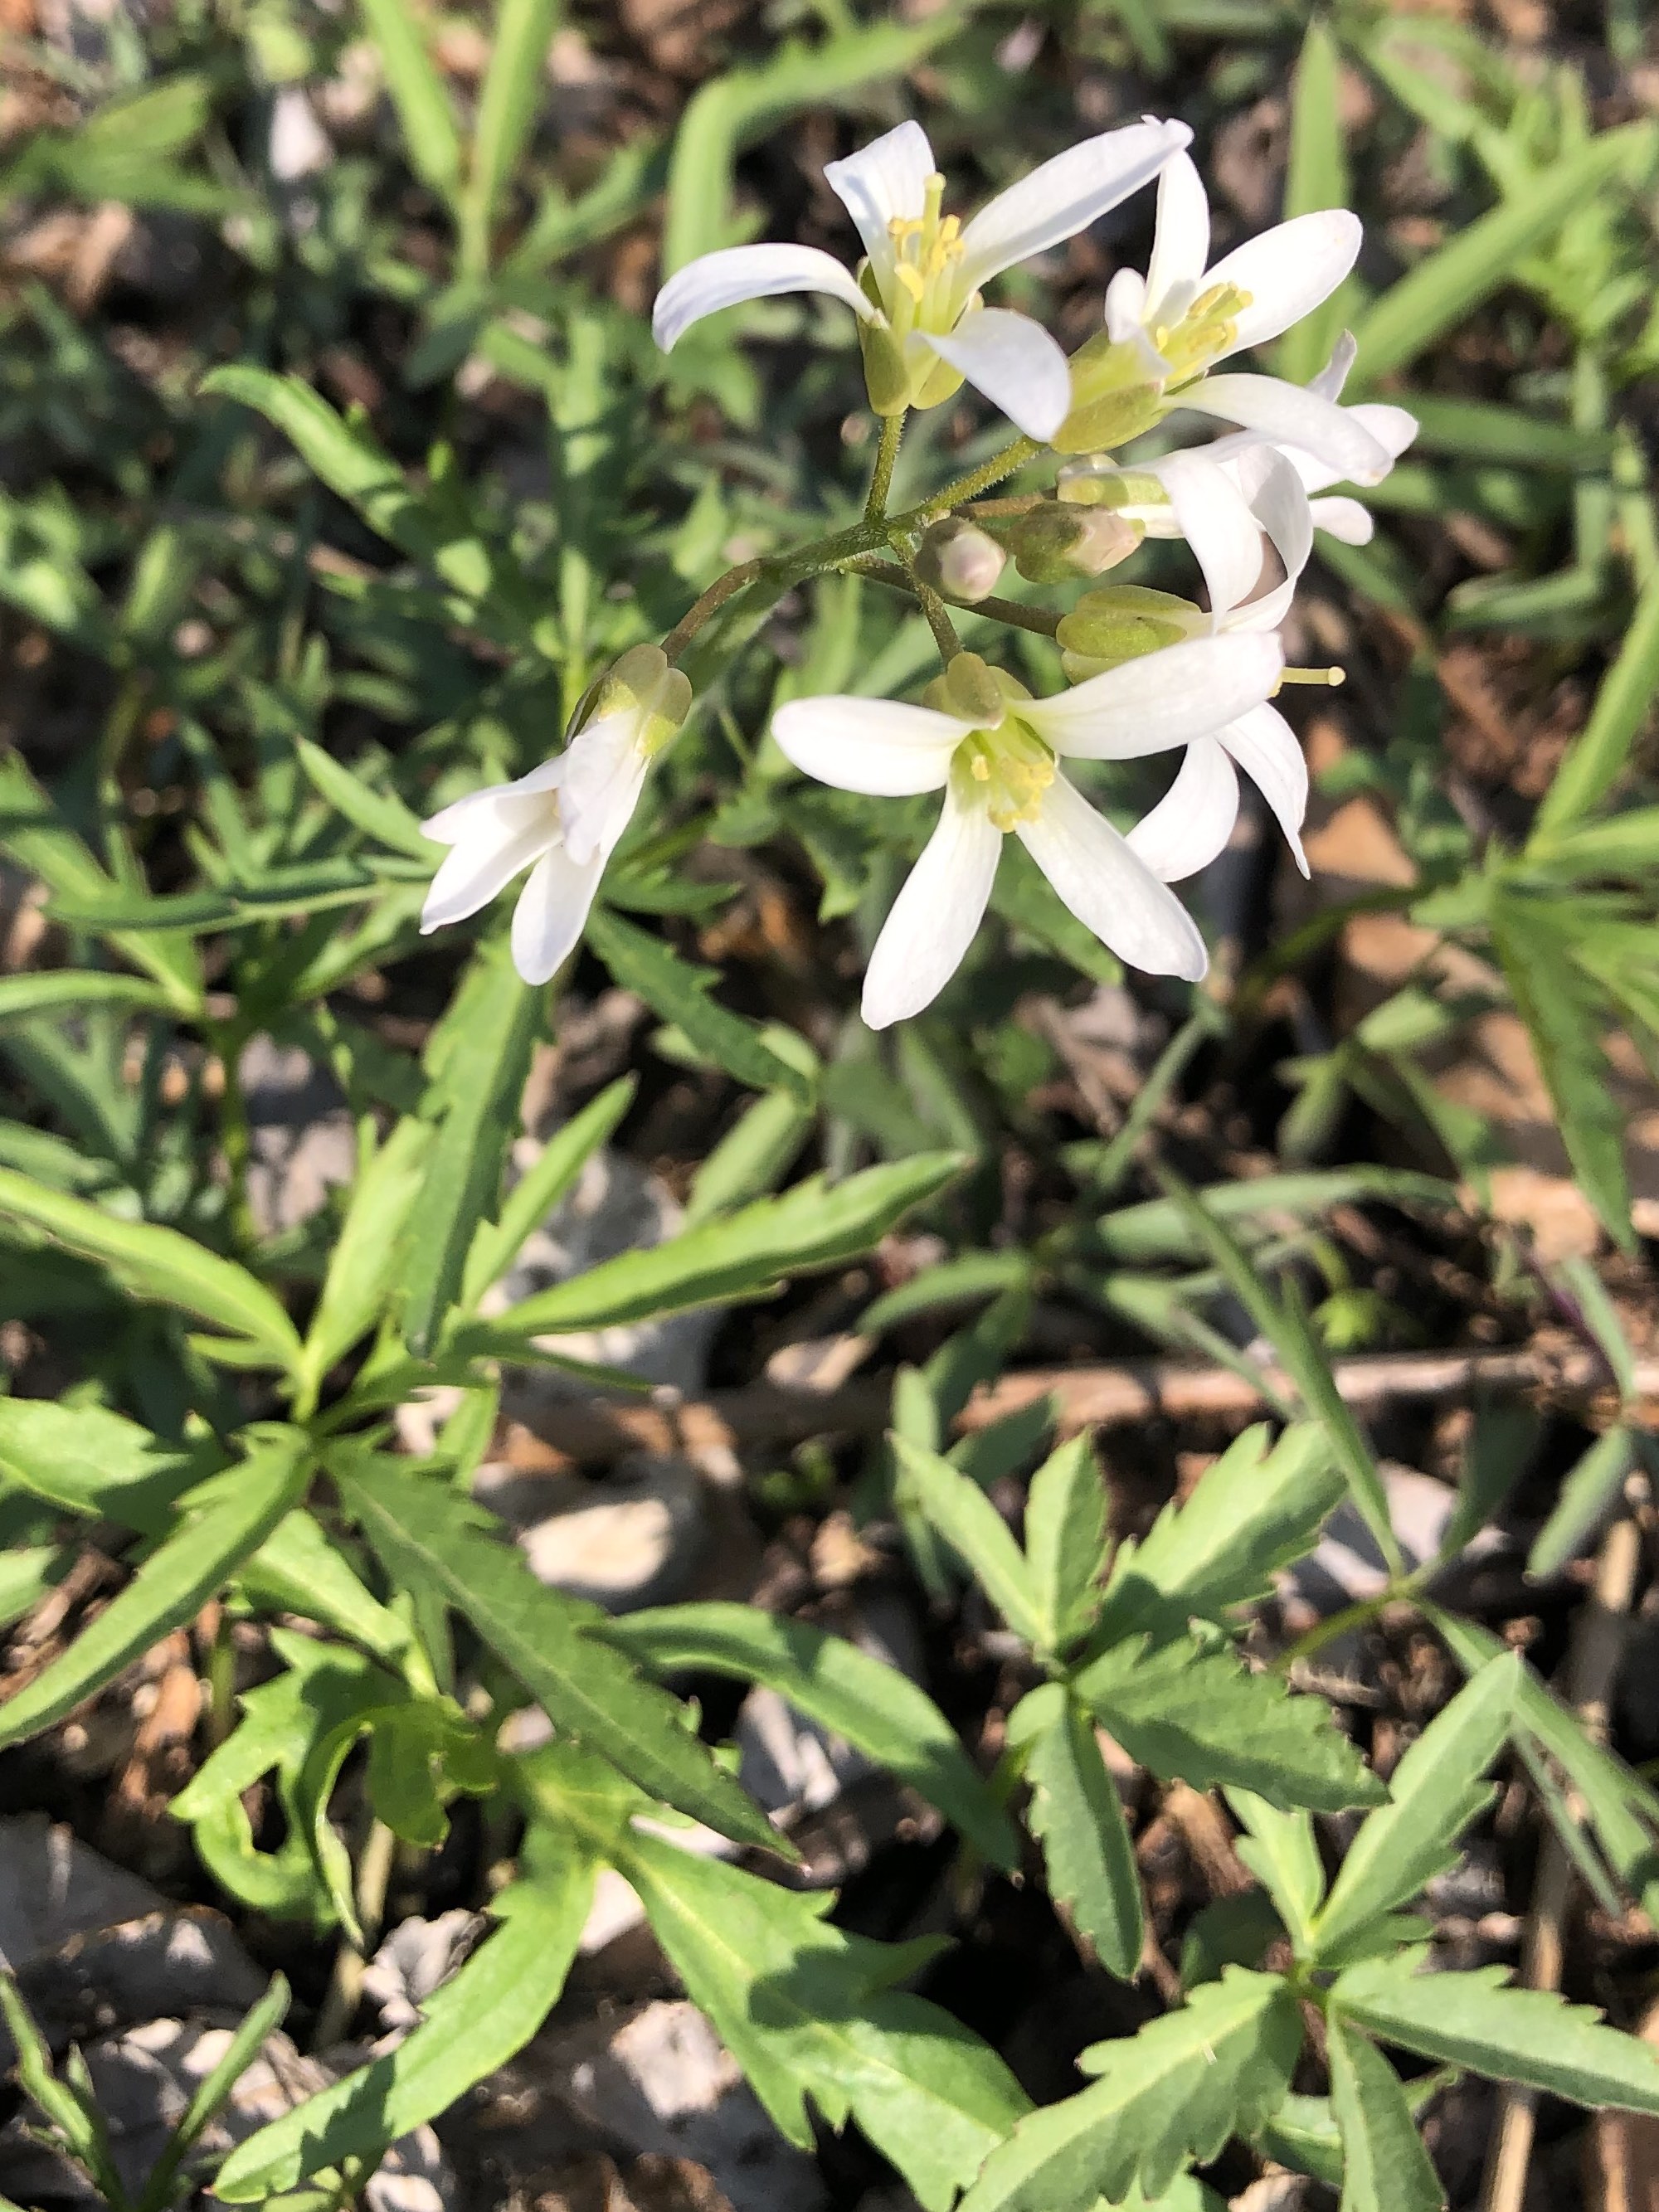 Cutleaf Toothwort in Oak Savanna by Council Ring in Madison, Wisconsin on April 3, 2021.